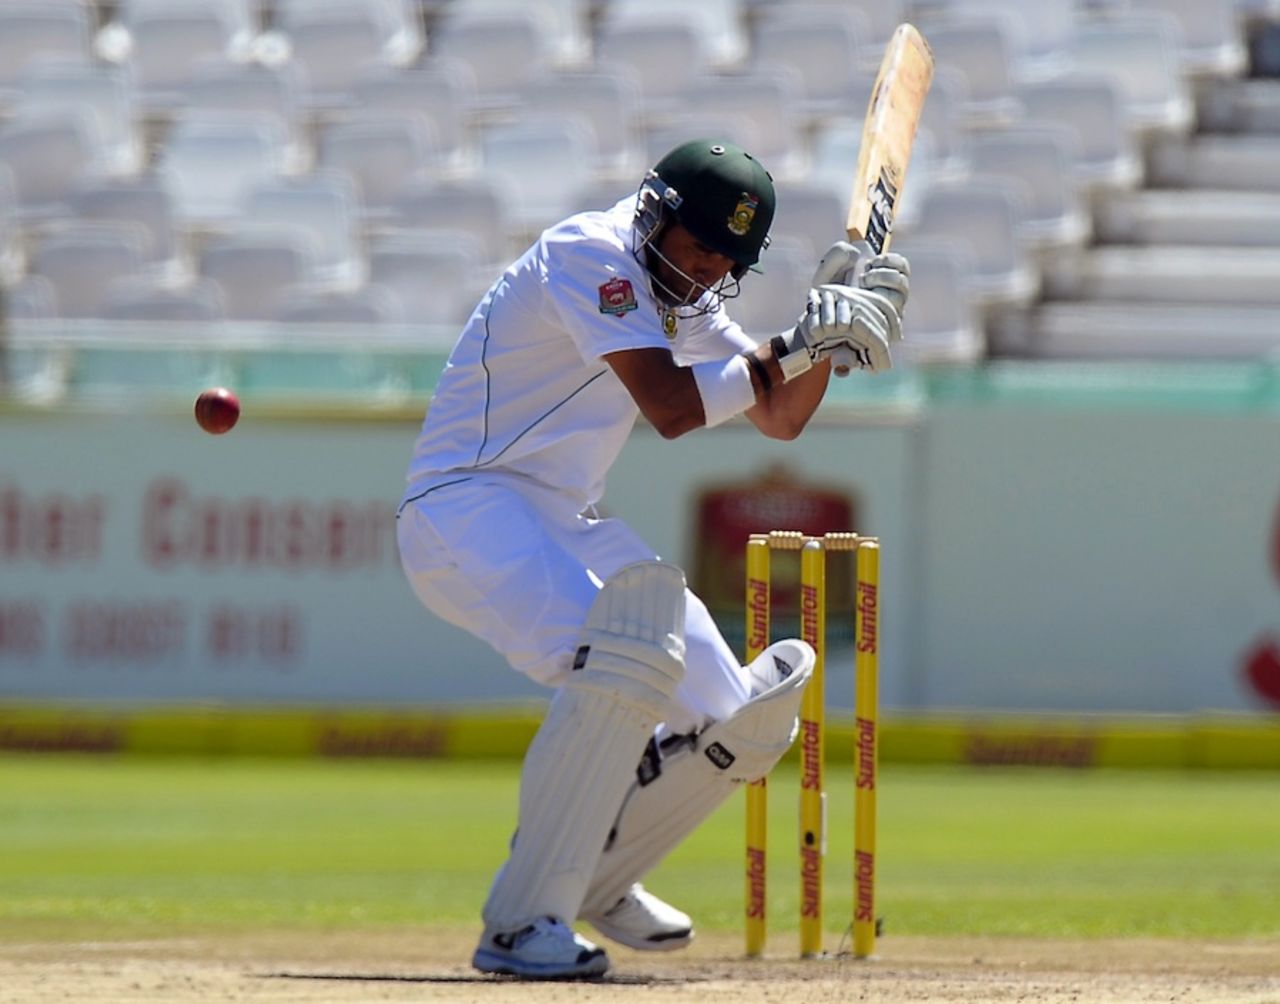 Robin Peterson avoids a short ball, South Africa v Pakistan, 2nd Test, Cape Town, 3rd day, February 16, 2013